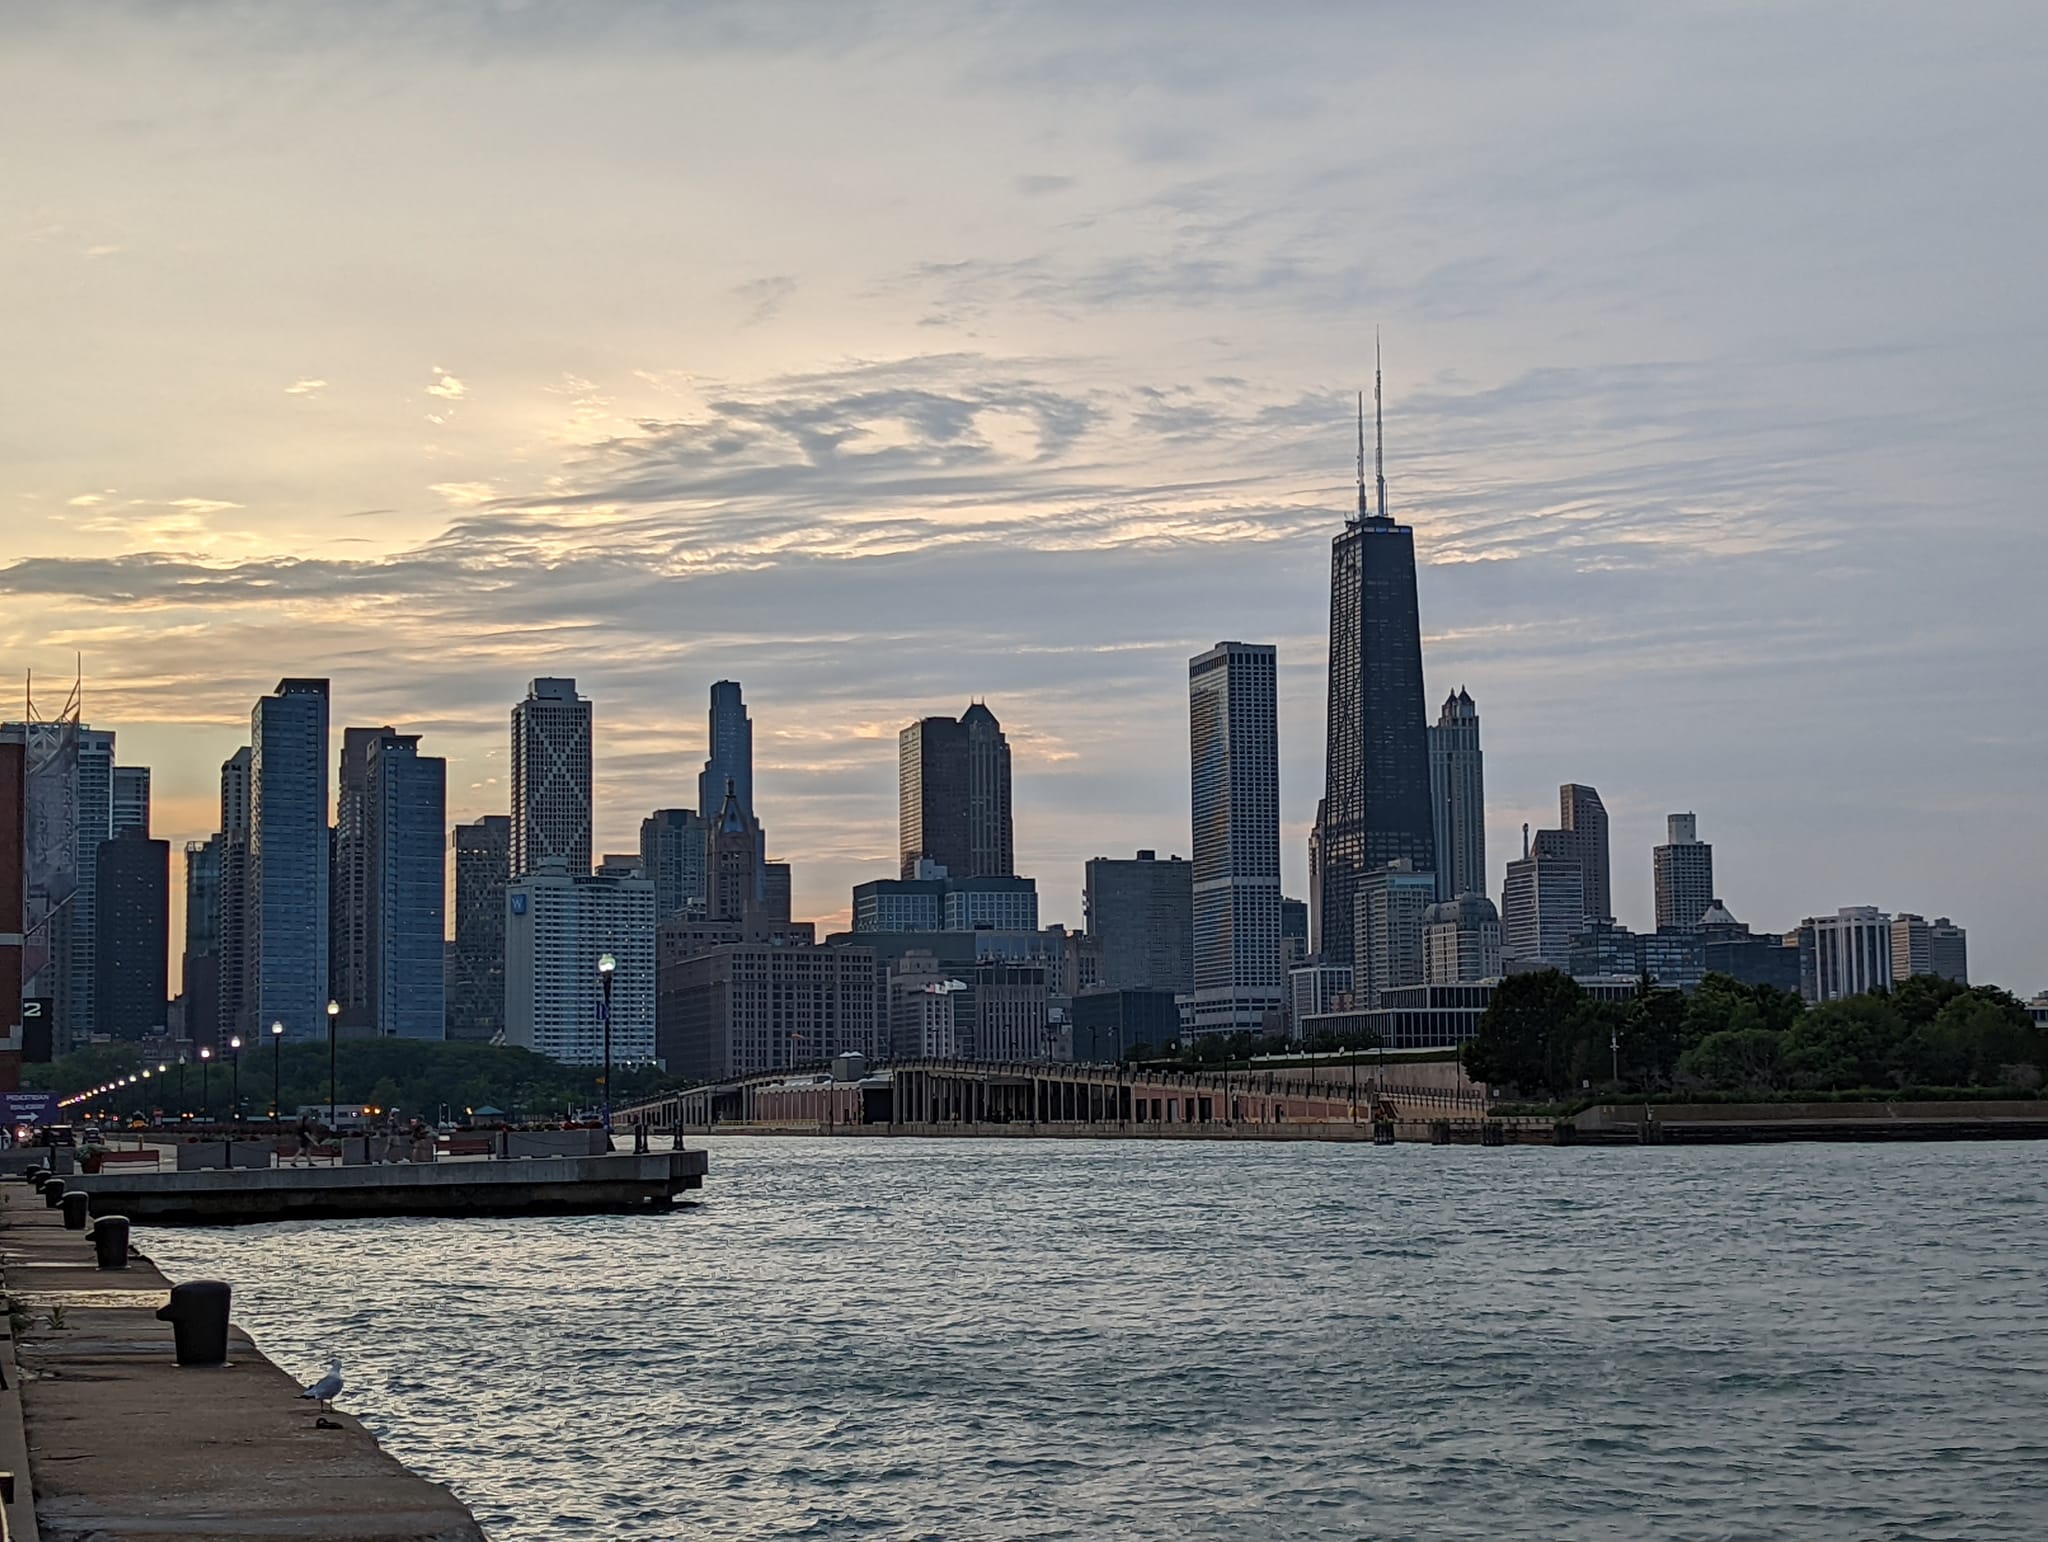 Chicago skyline from the Navy pier